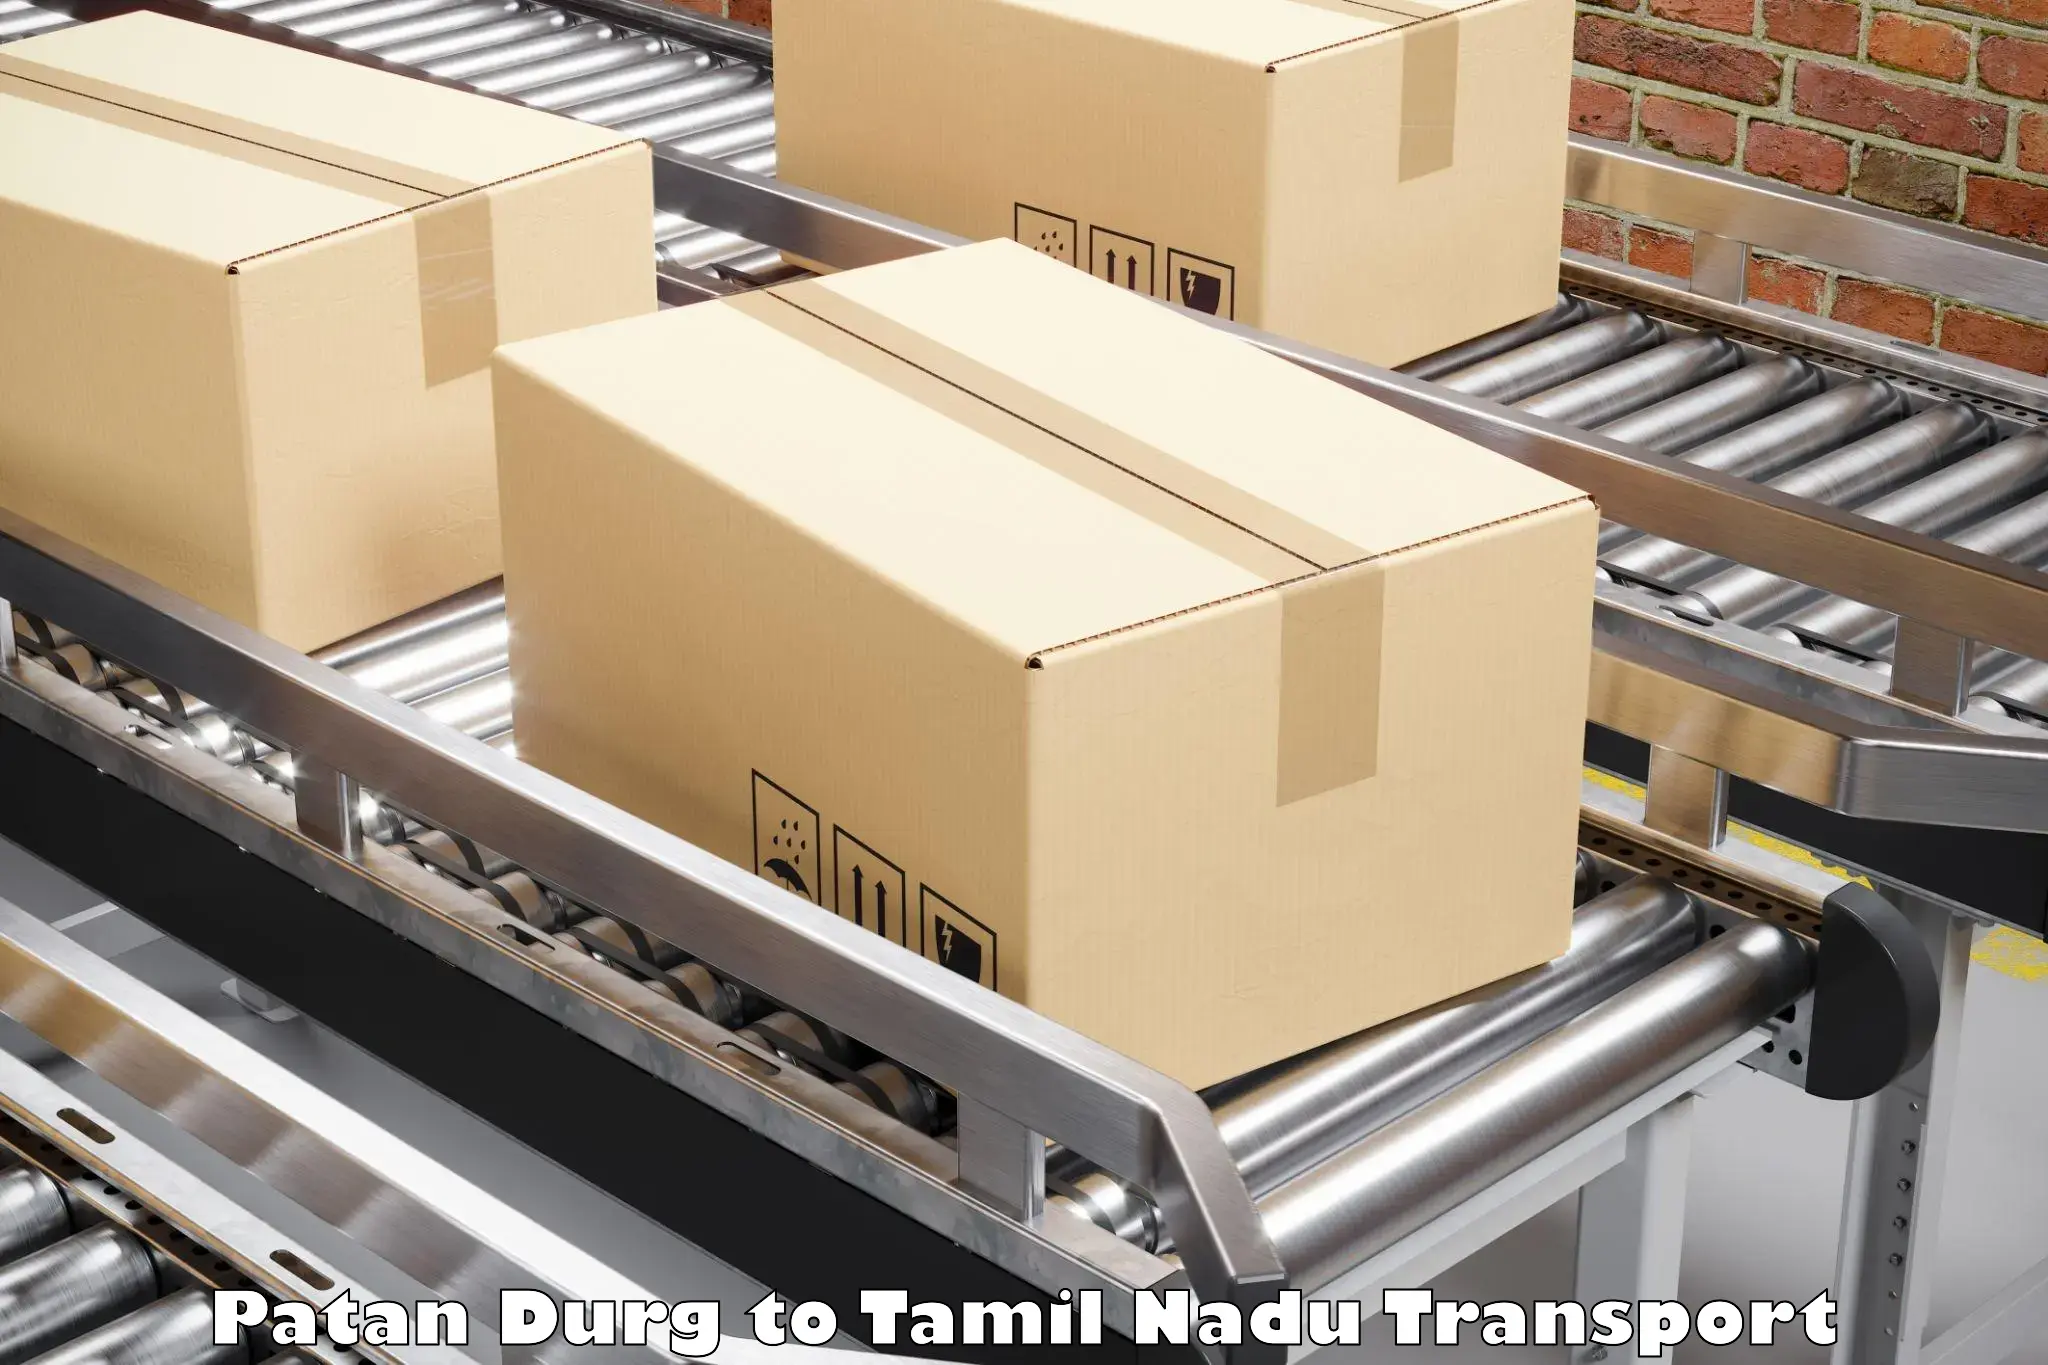 Daily parcel service transport Patan Durg to Ranipet